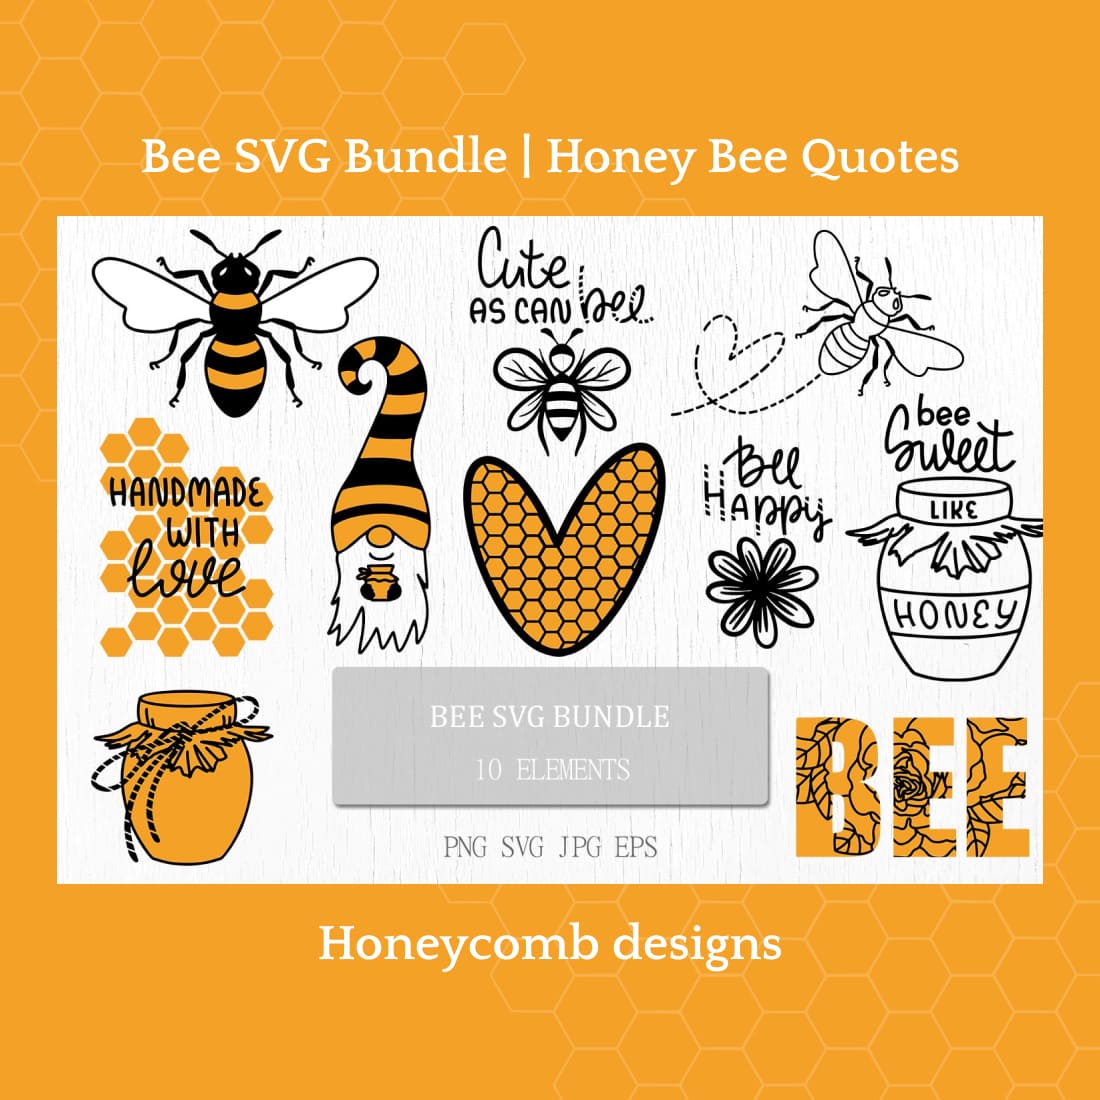 Bee SVG Bundle in black and yellow colors.